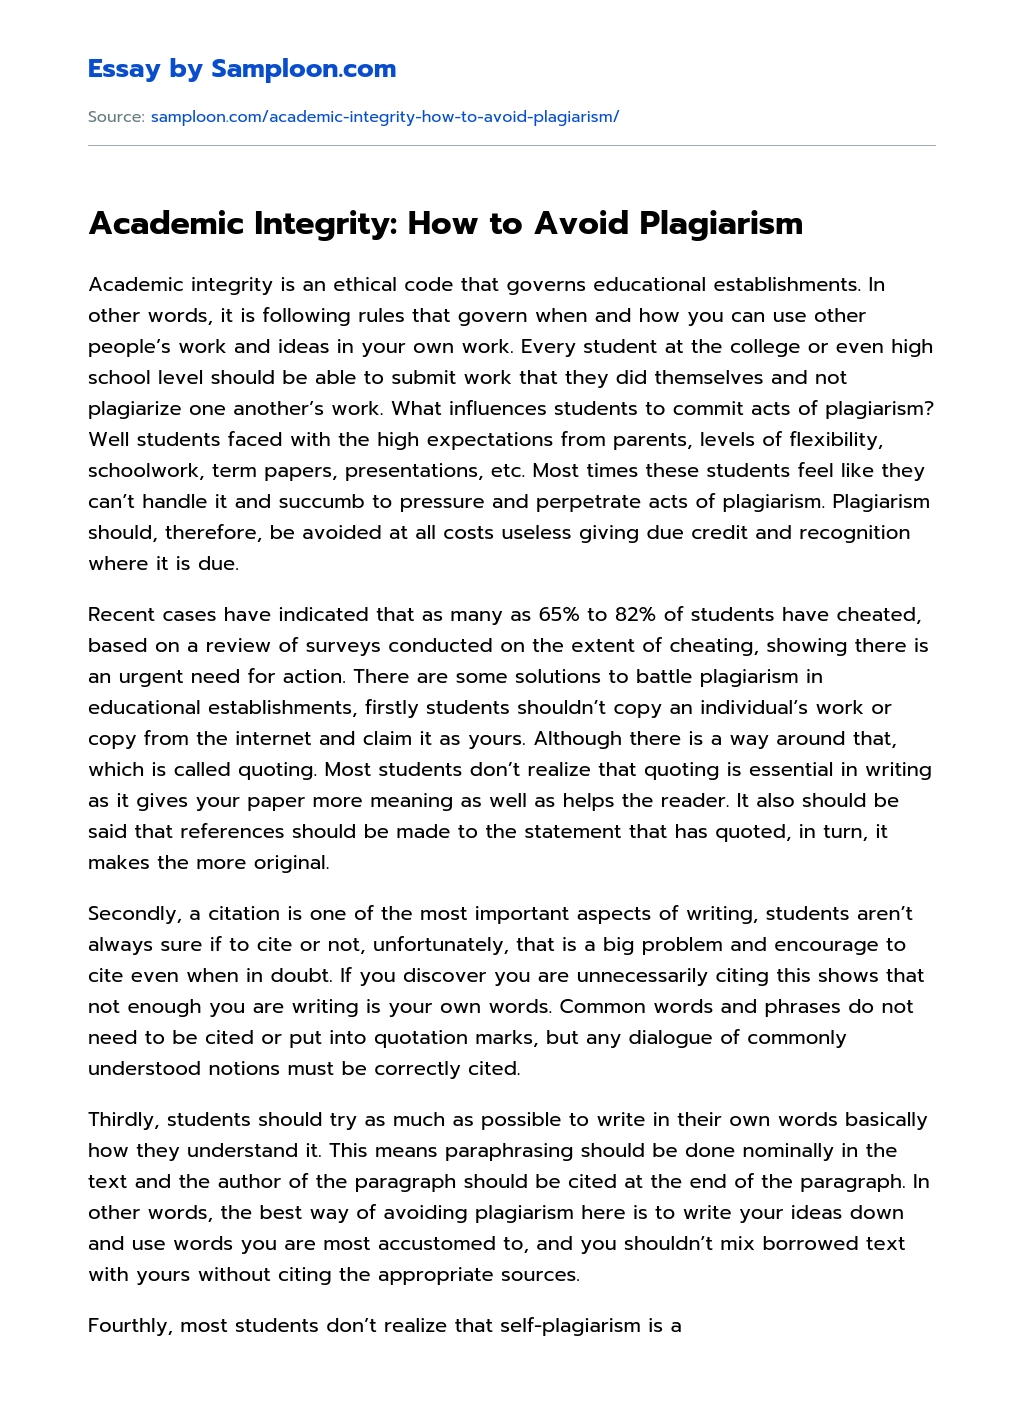 Academic Integrity: How to Avoid Plagiarism essay